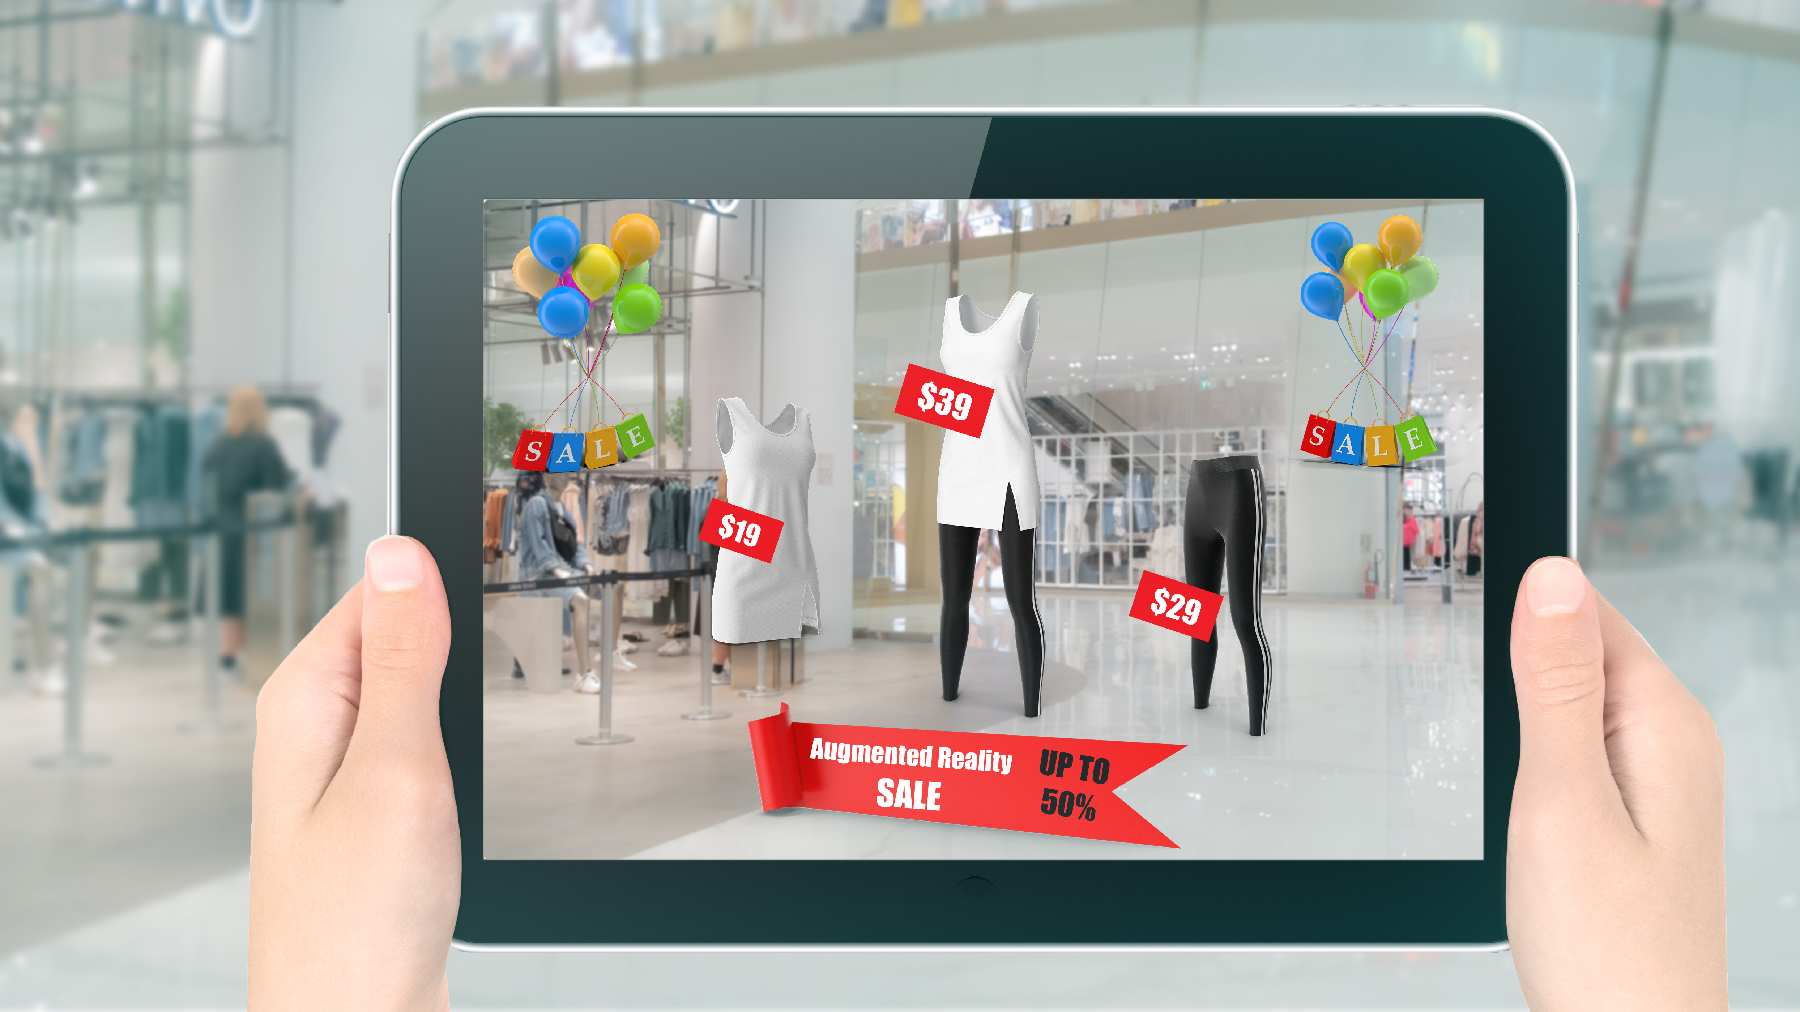 Stock image of a customer using a tablet while shopping to see sales overlaid on the in-store image.